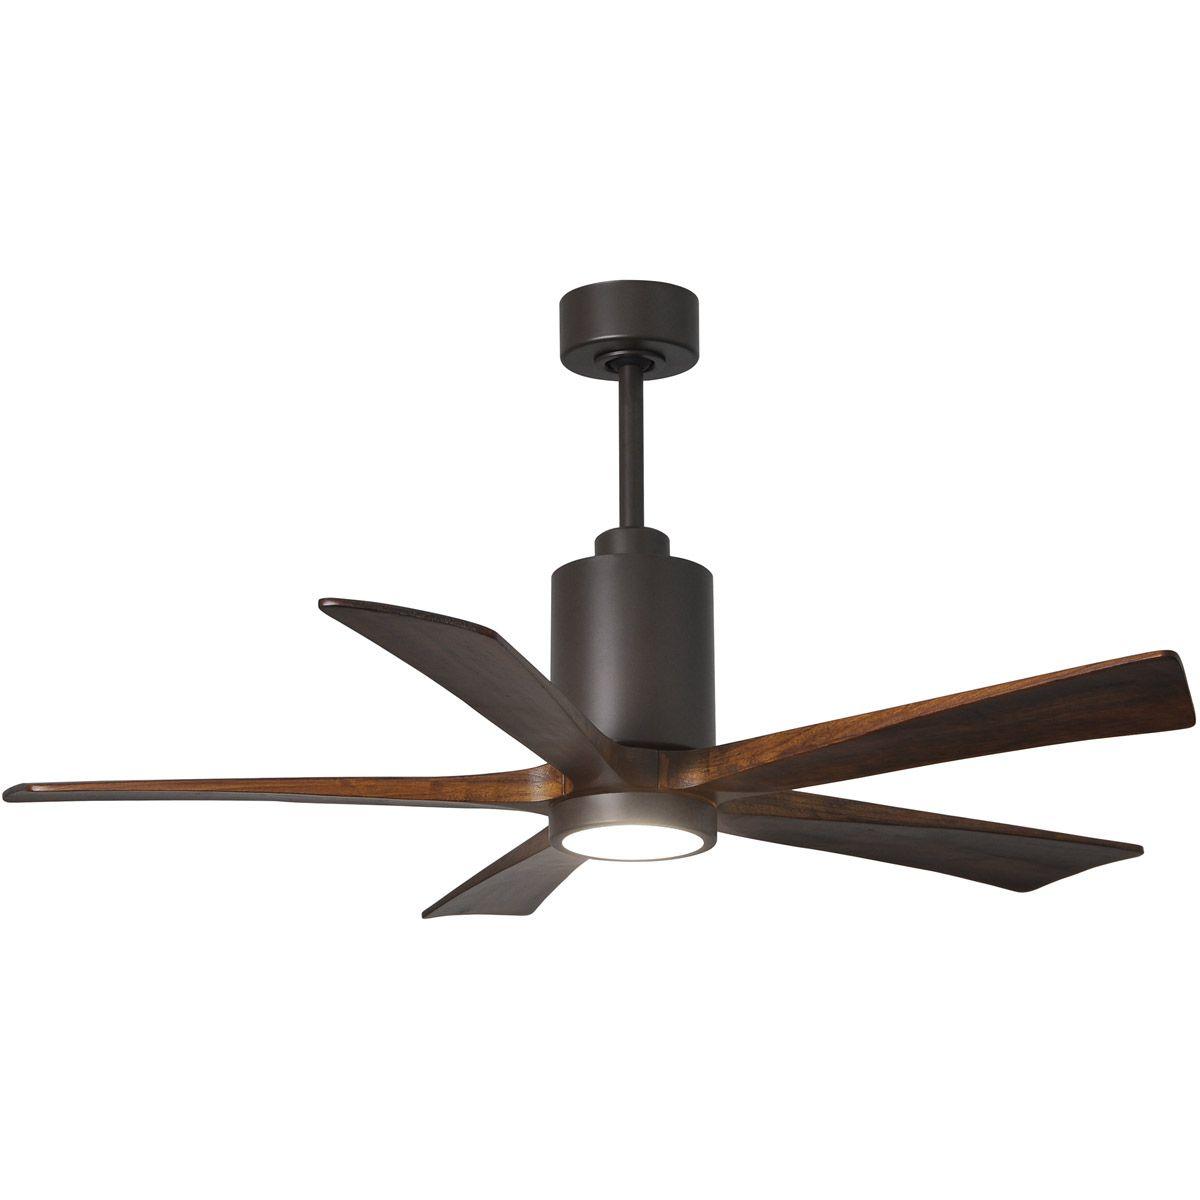 Patricia 52 Inch 5 Blades Modern Outdoor Ceiling Fan With Light, Wall And Remote Control Included - Bees Lighting